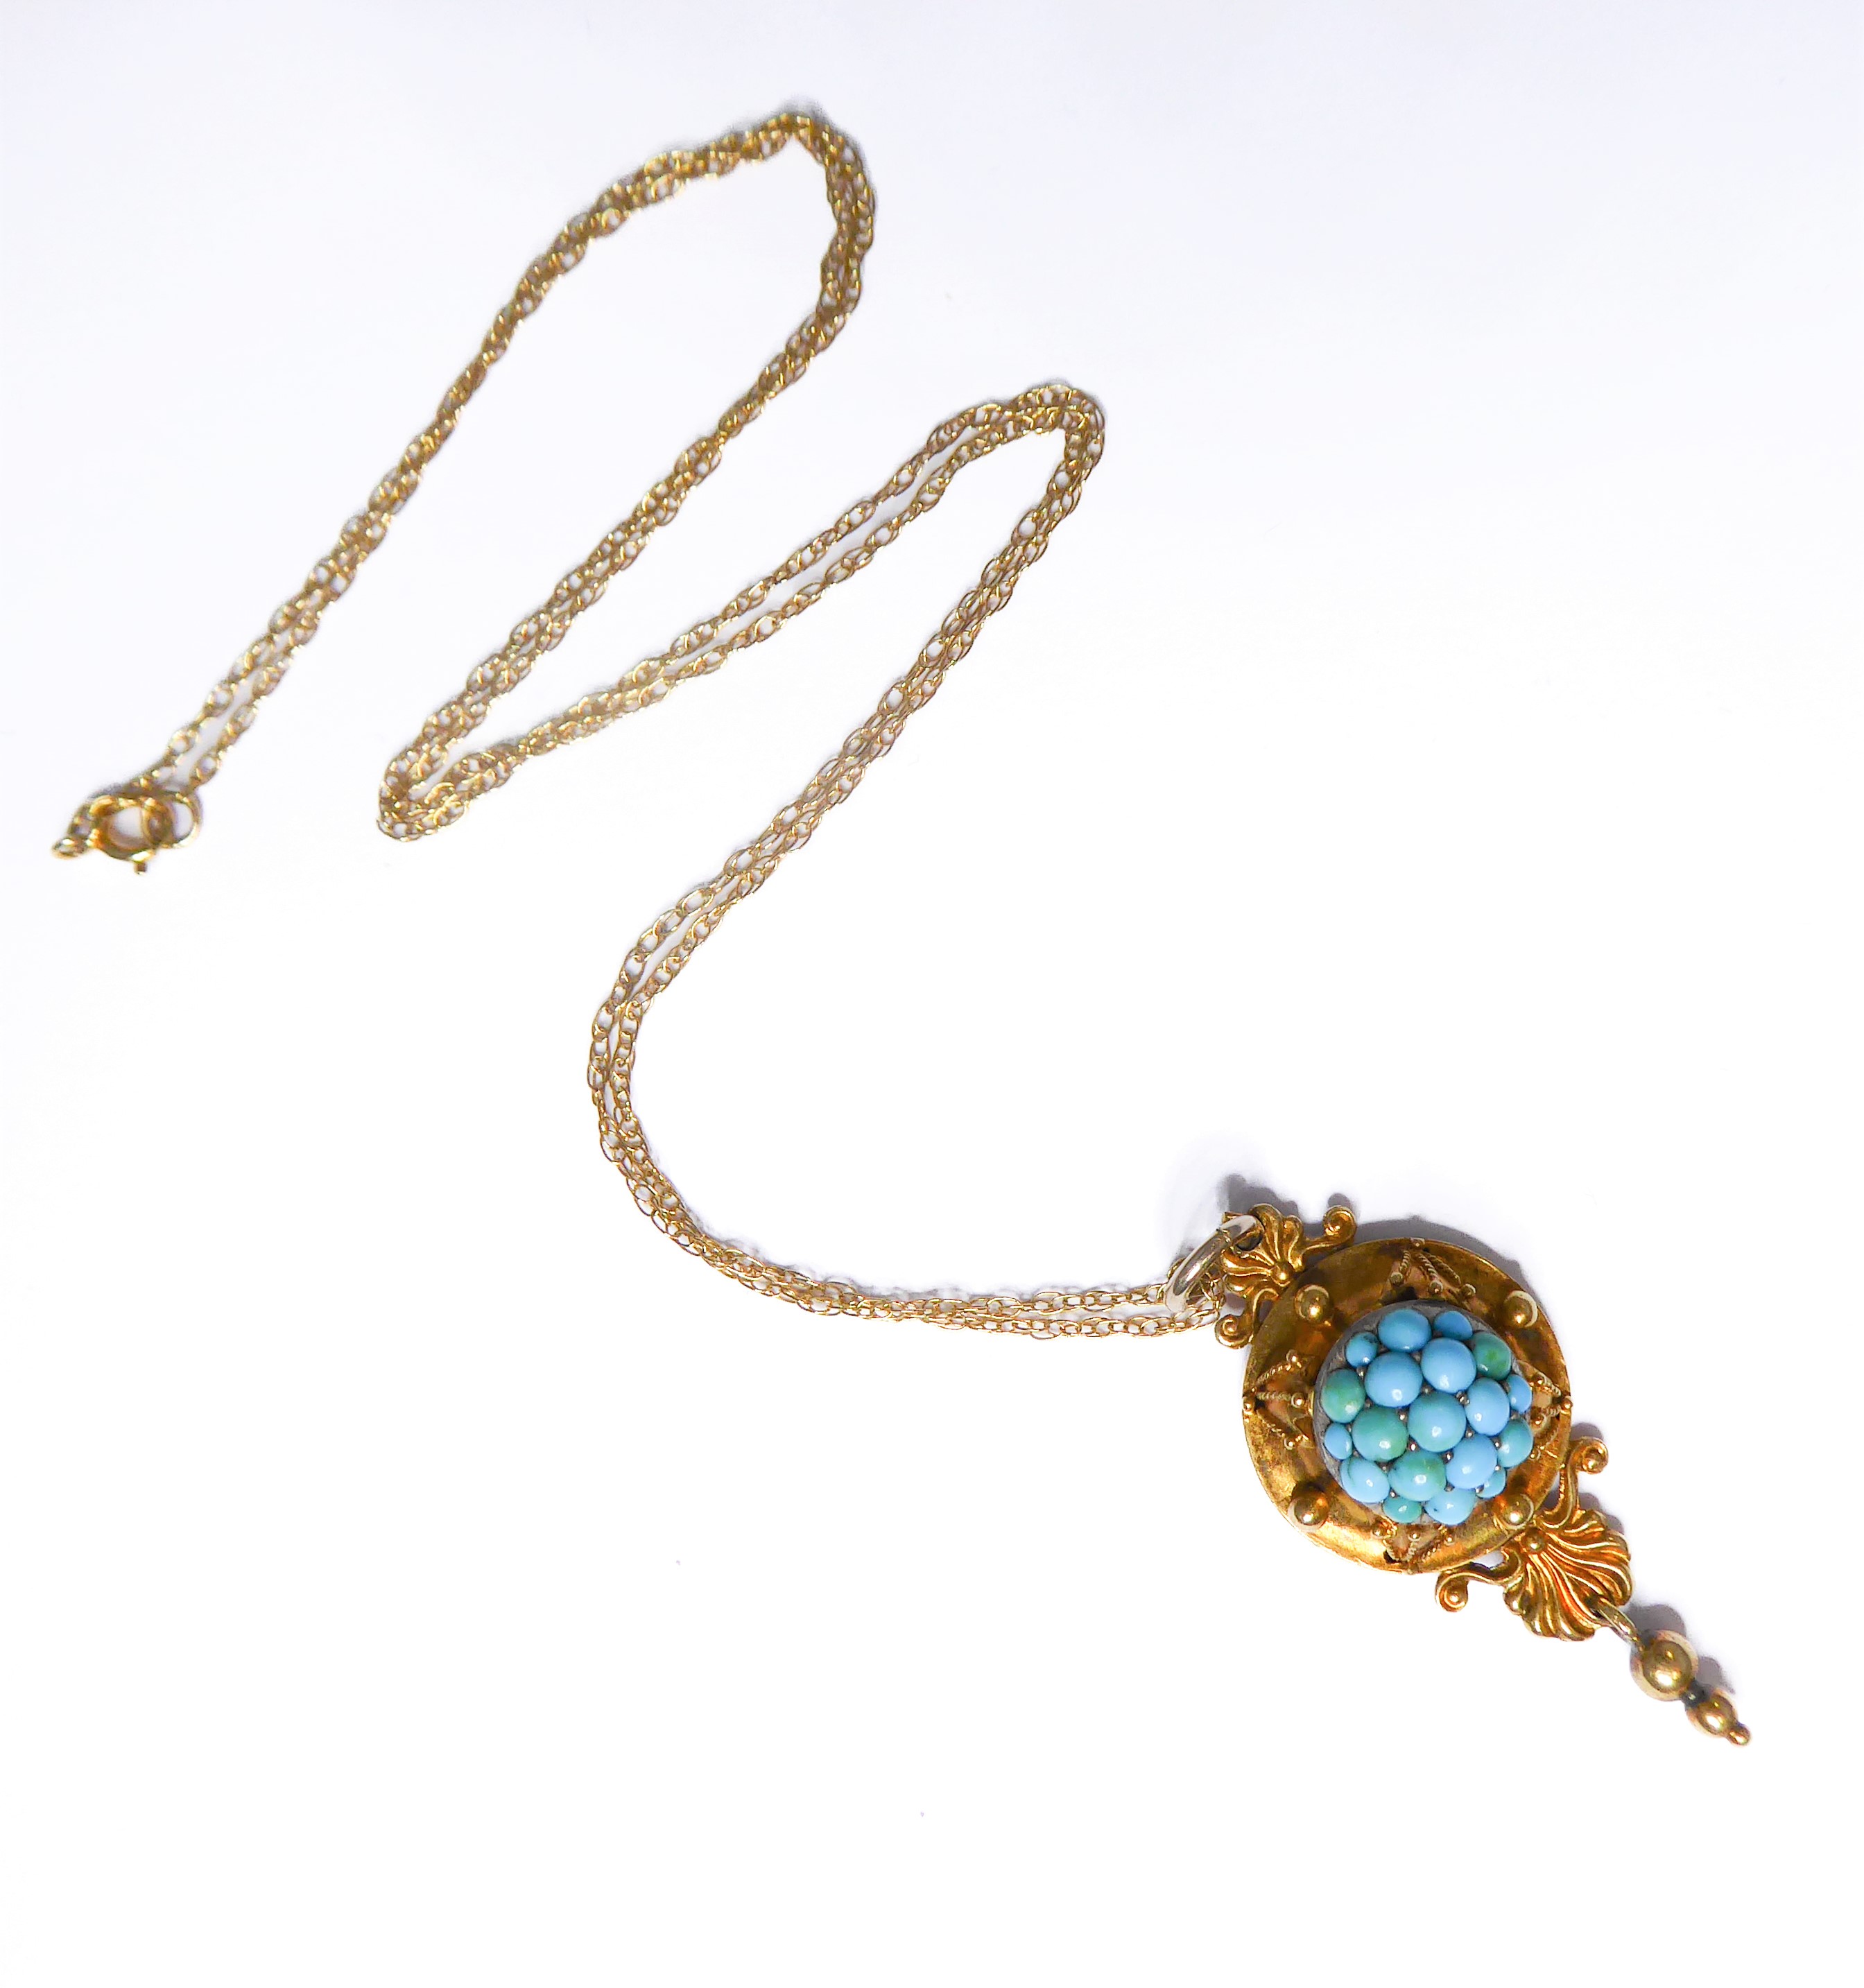 A Victorian gold and turquoise pendant and chain